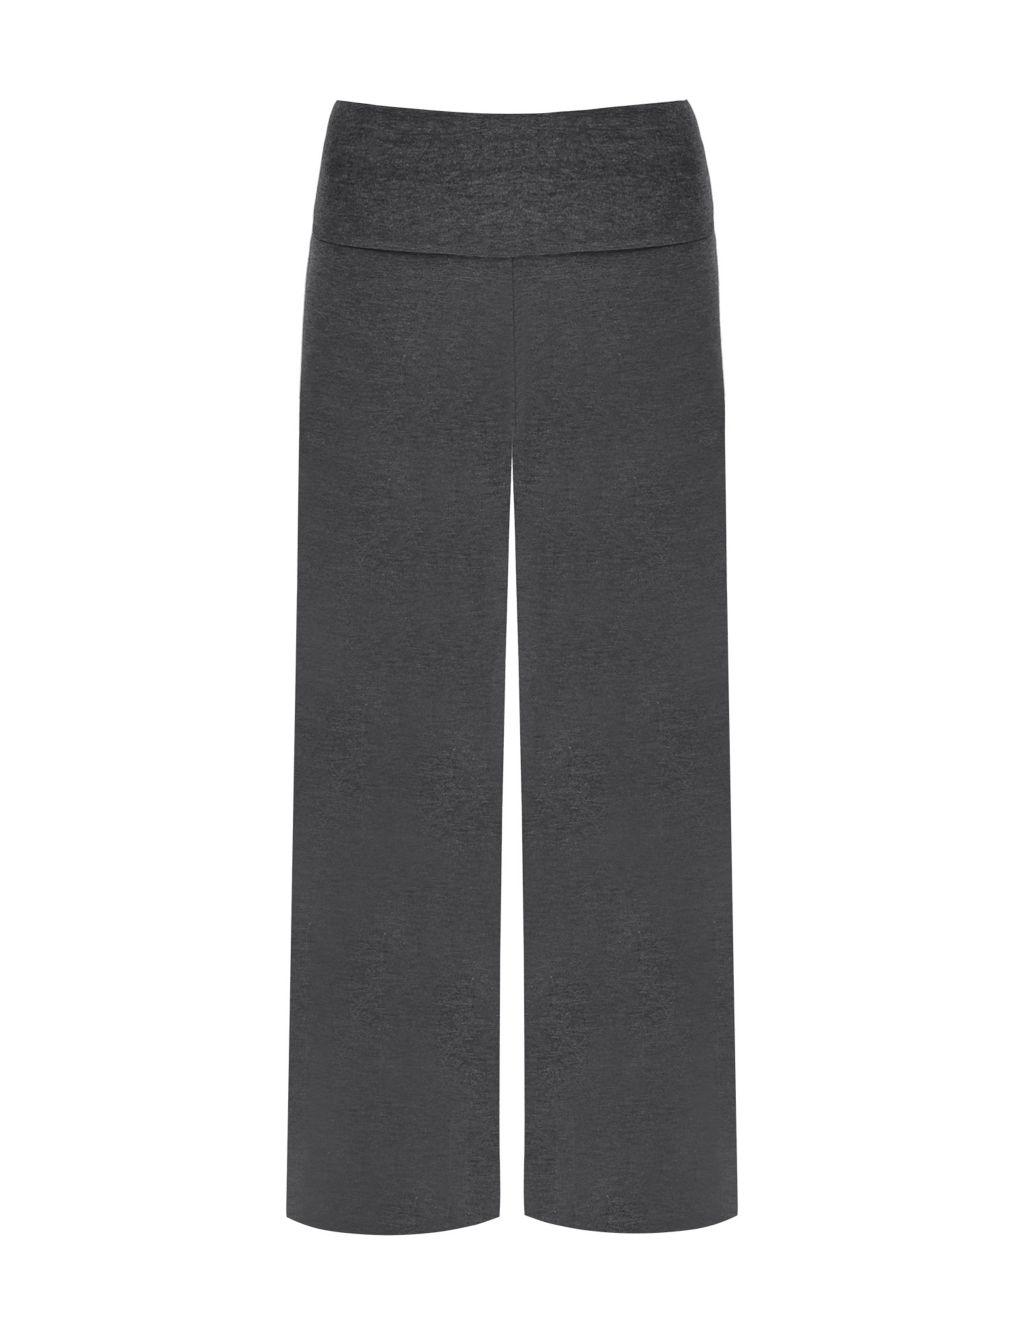 Marl Elasticated Waist Relaxed Trousers 1 of 4